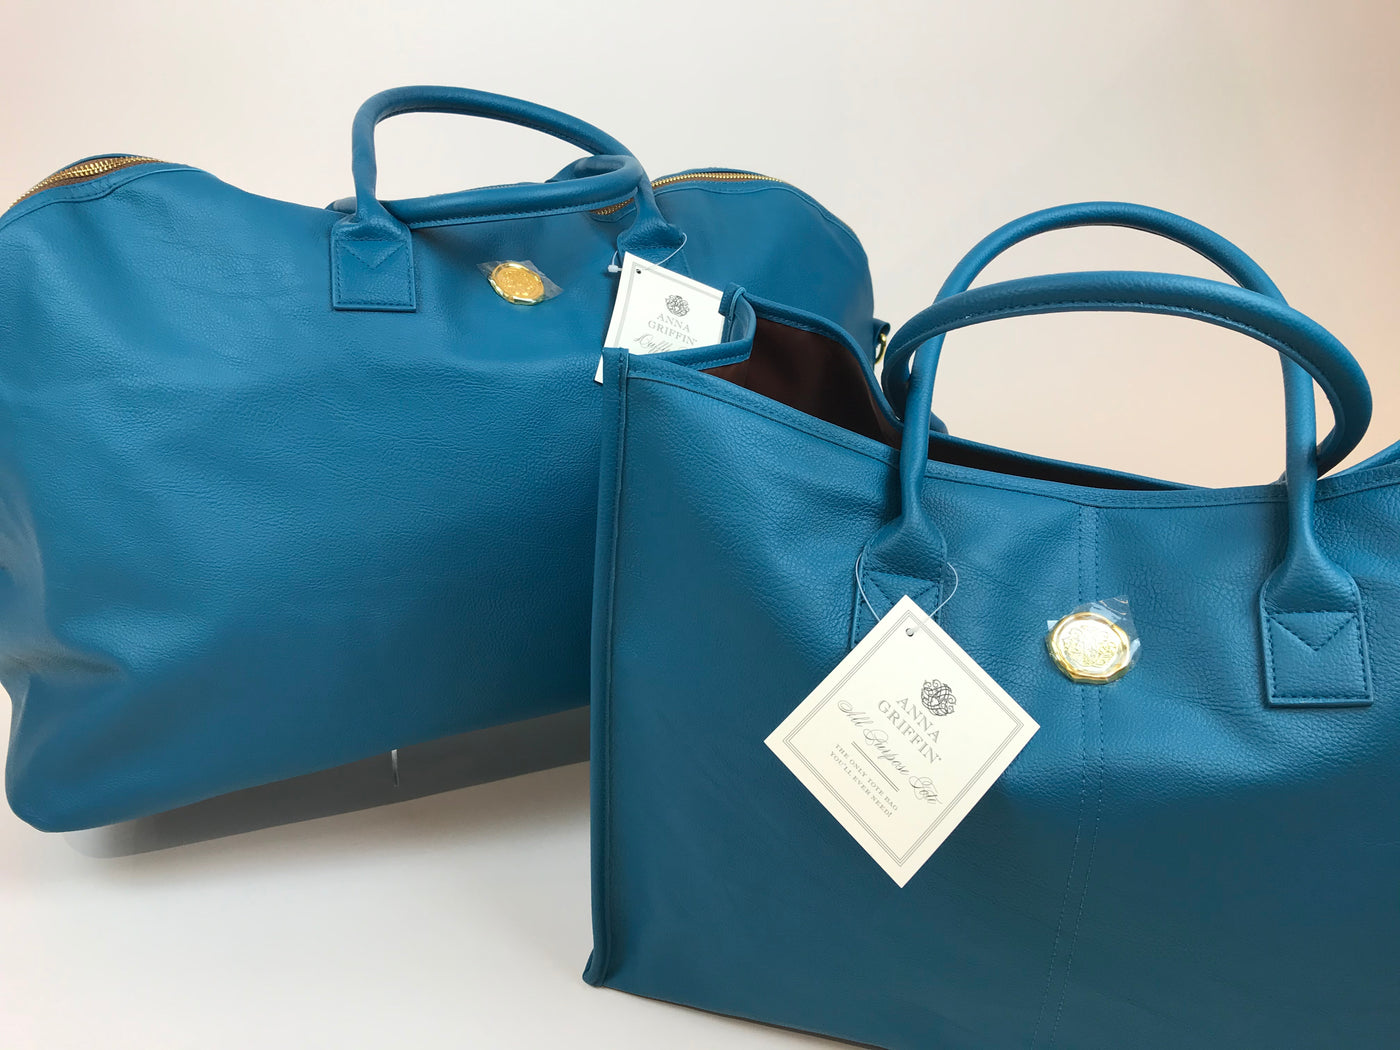 Peacock Blue Tote